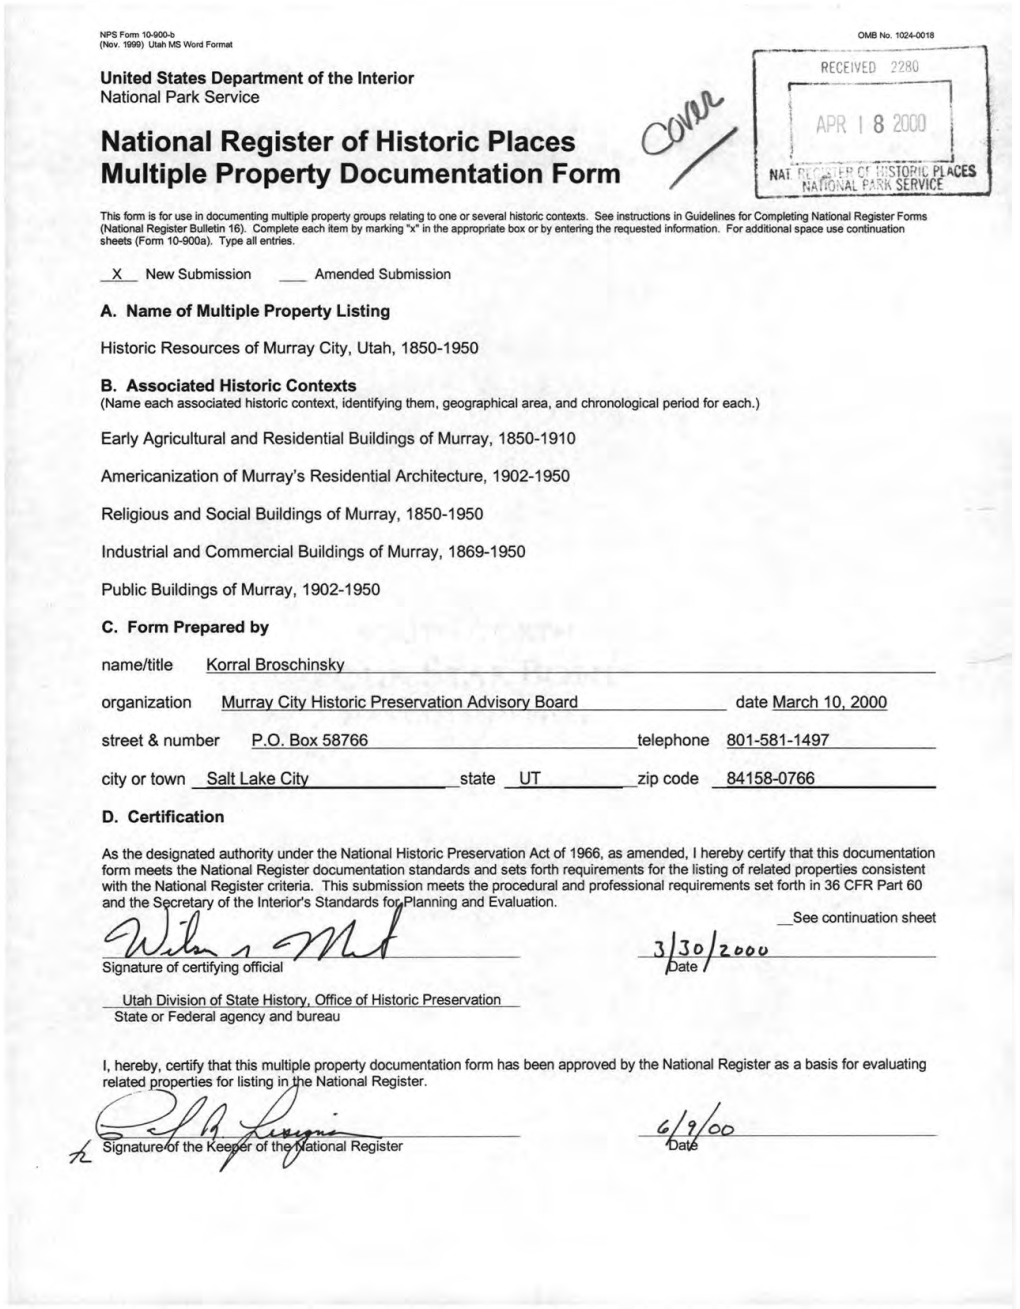 Murray City, Utah Multiple Property Submission